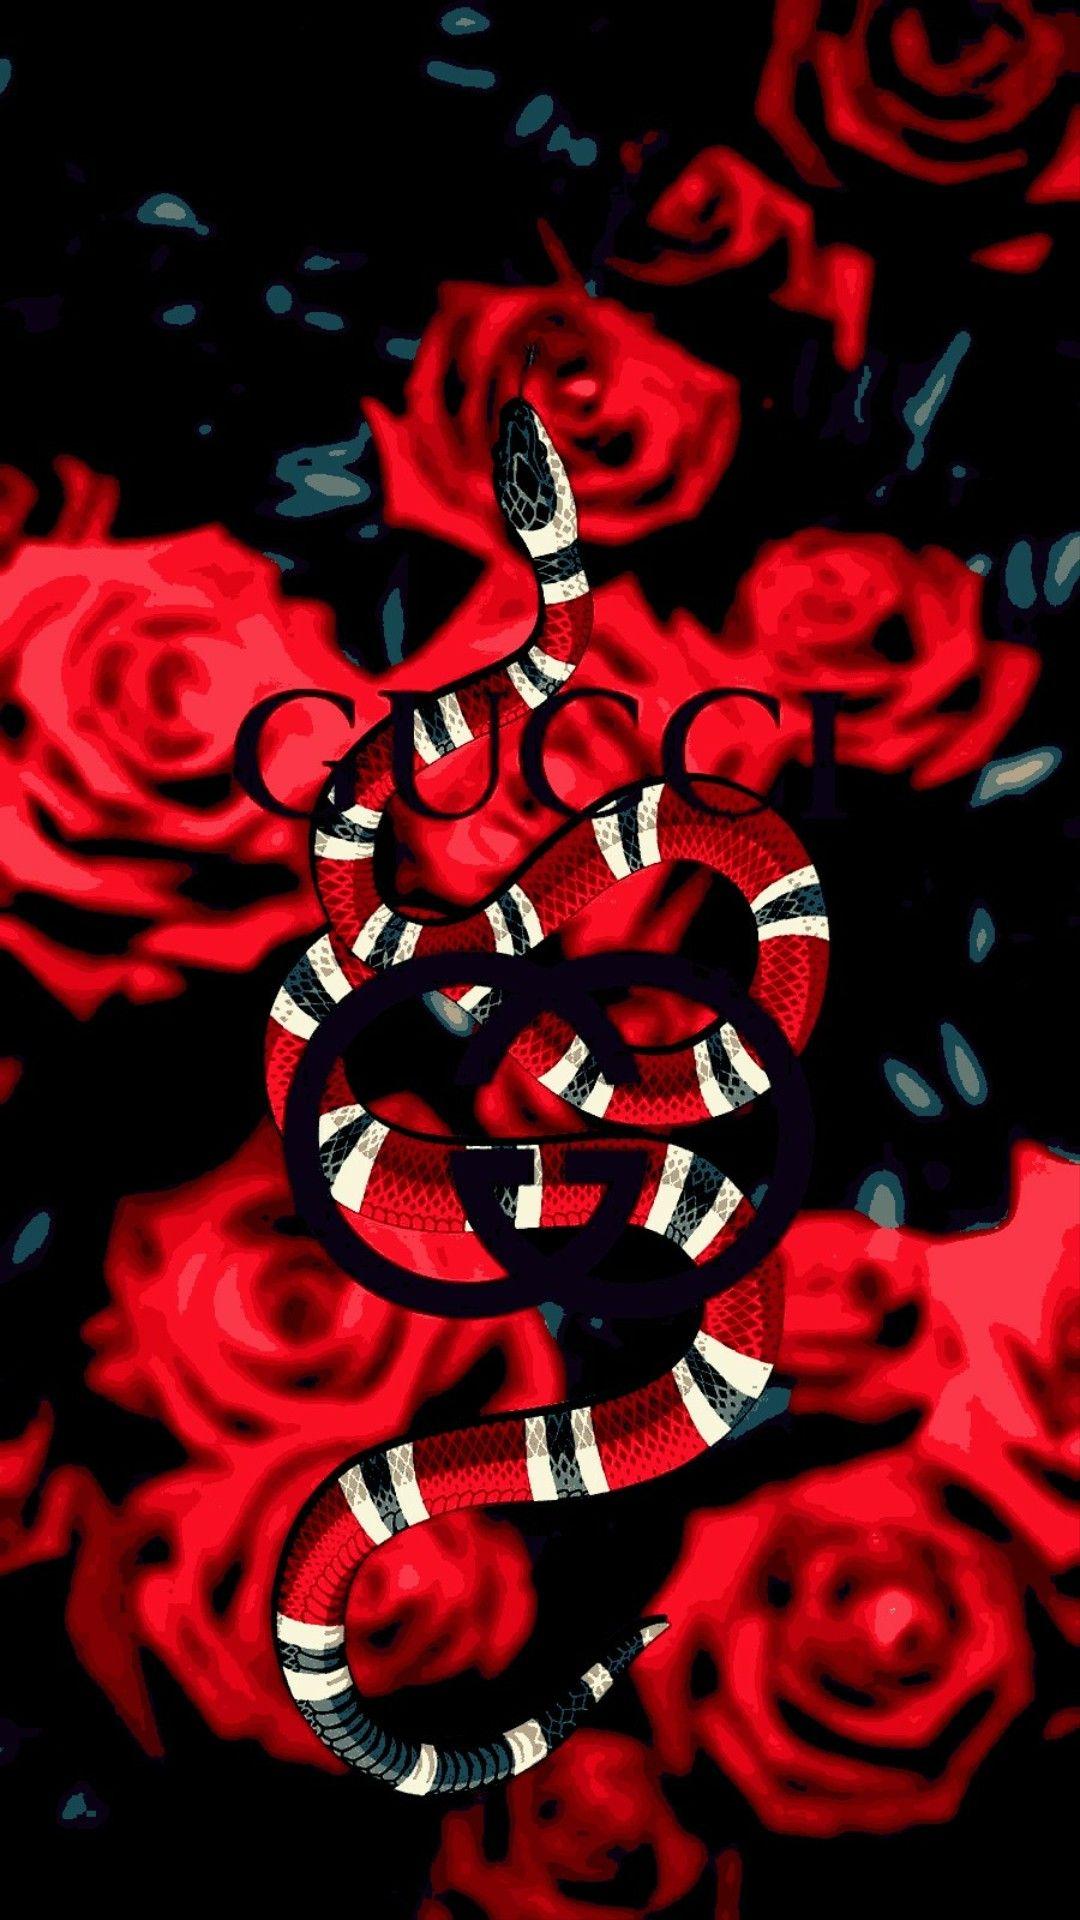 Roses of Gucci Snake. Wallpaper. Gucci wallpaper iphone